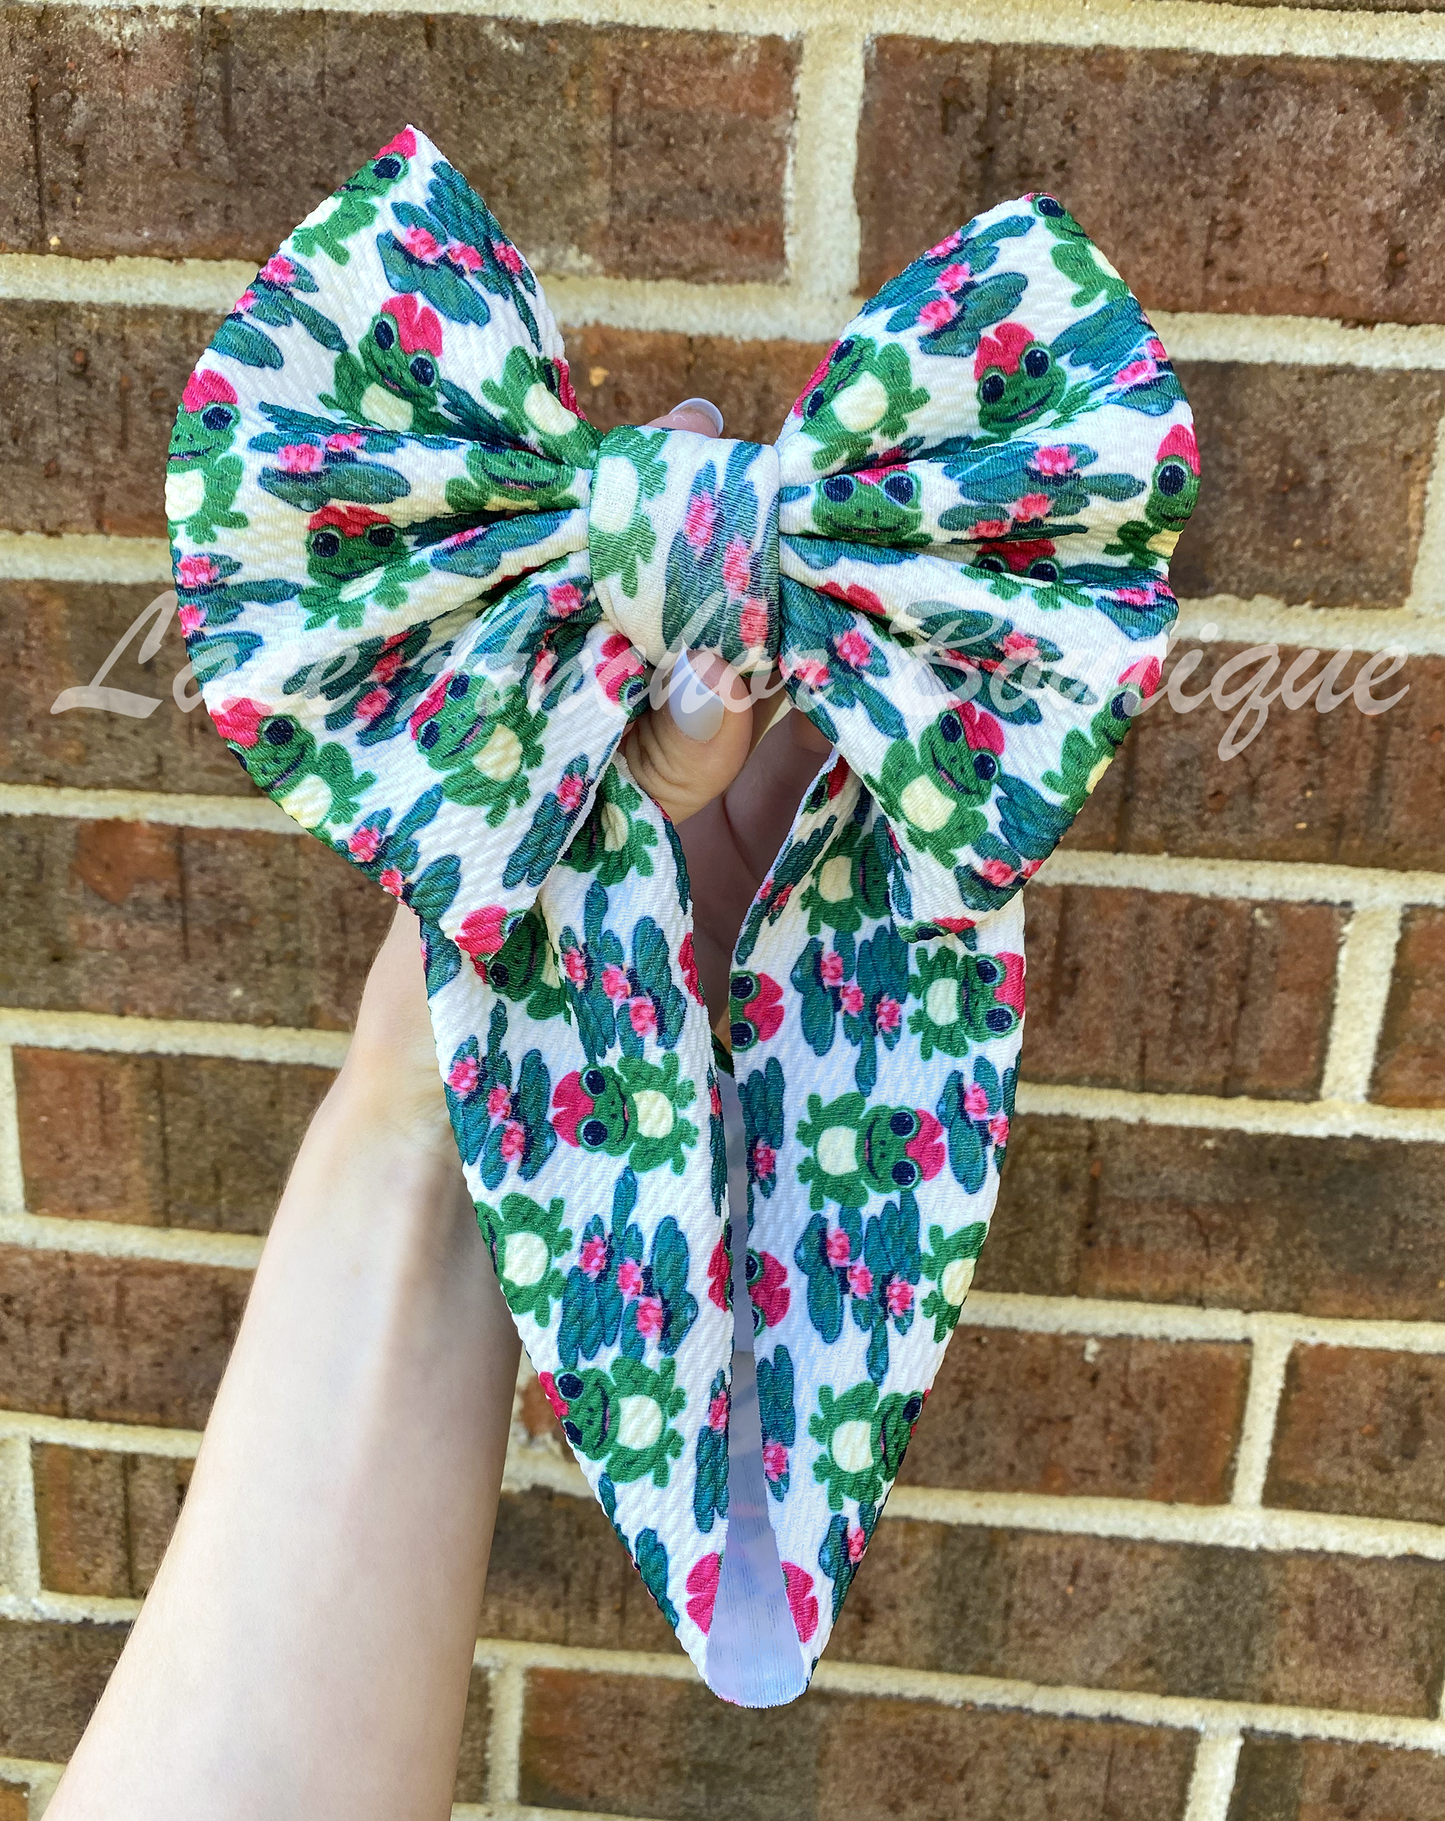 Girls Original Custom Green and Pink Frog Print Design Hair Bow Clip or Wrap Style Bow